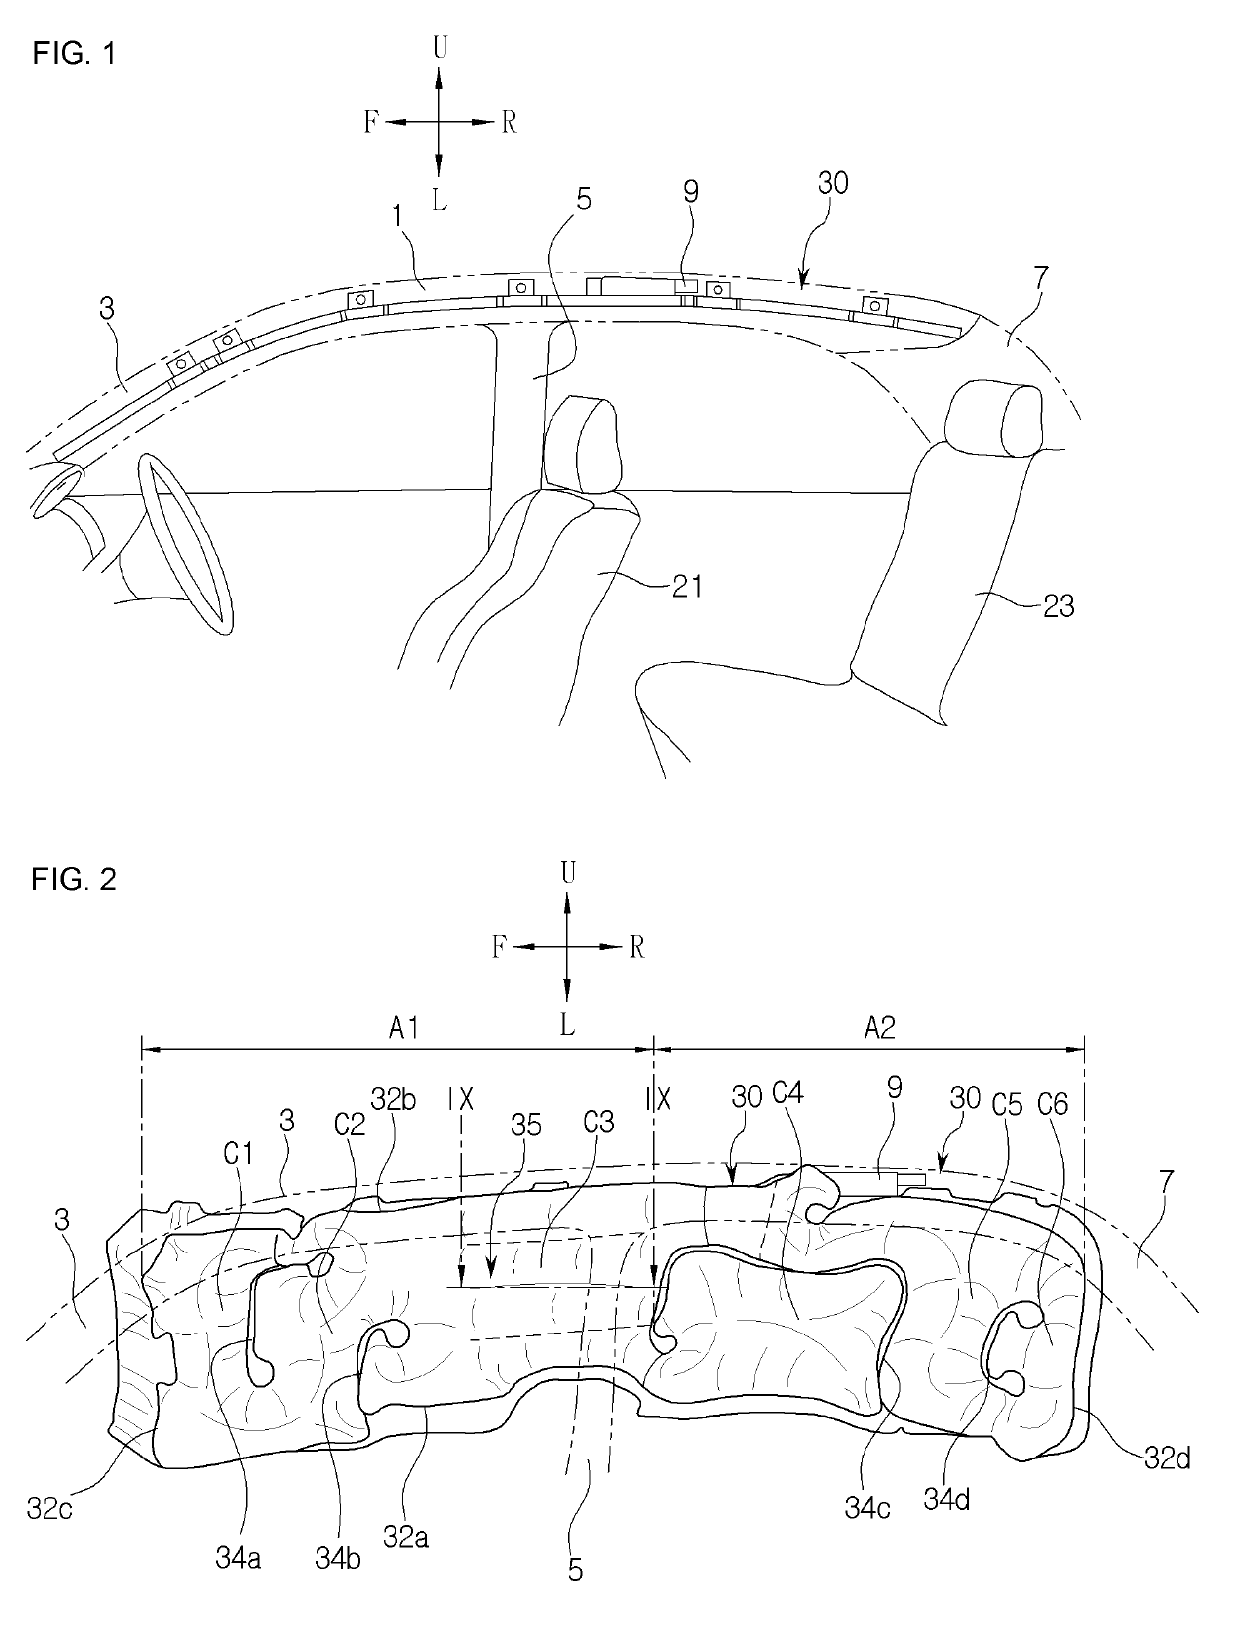 Curtain airbag of vehicle